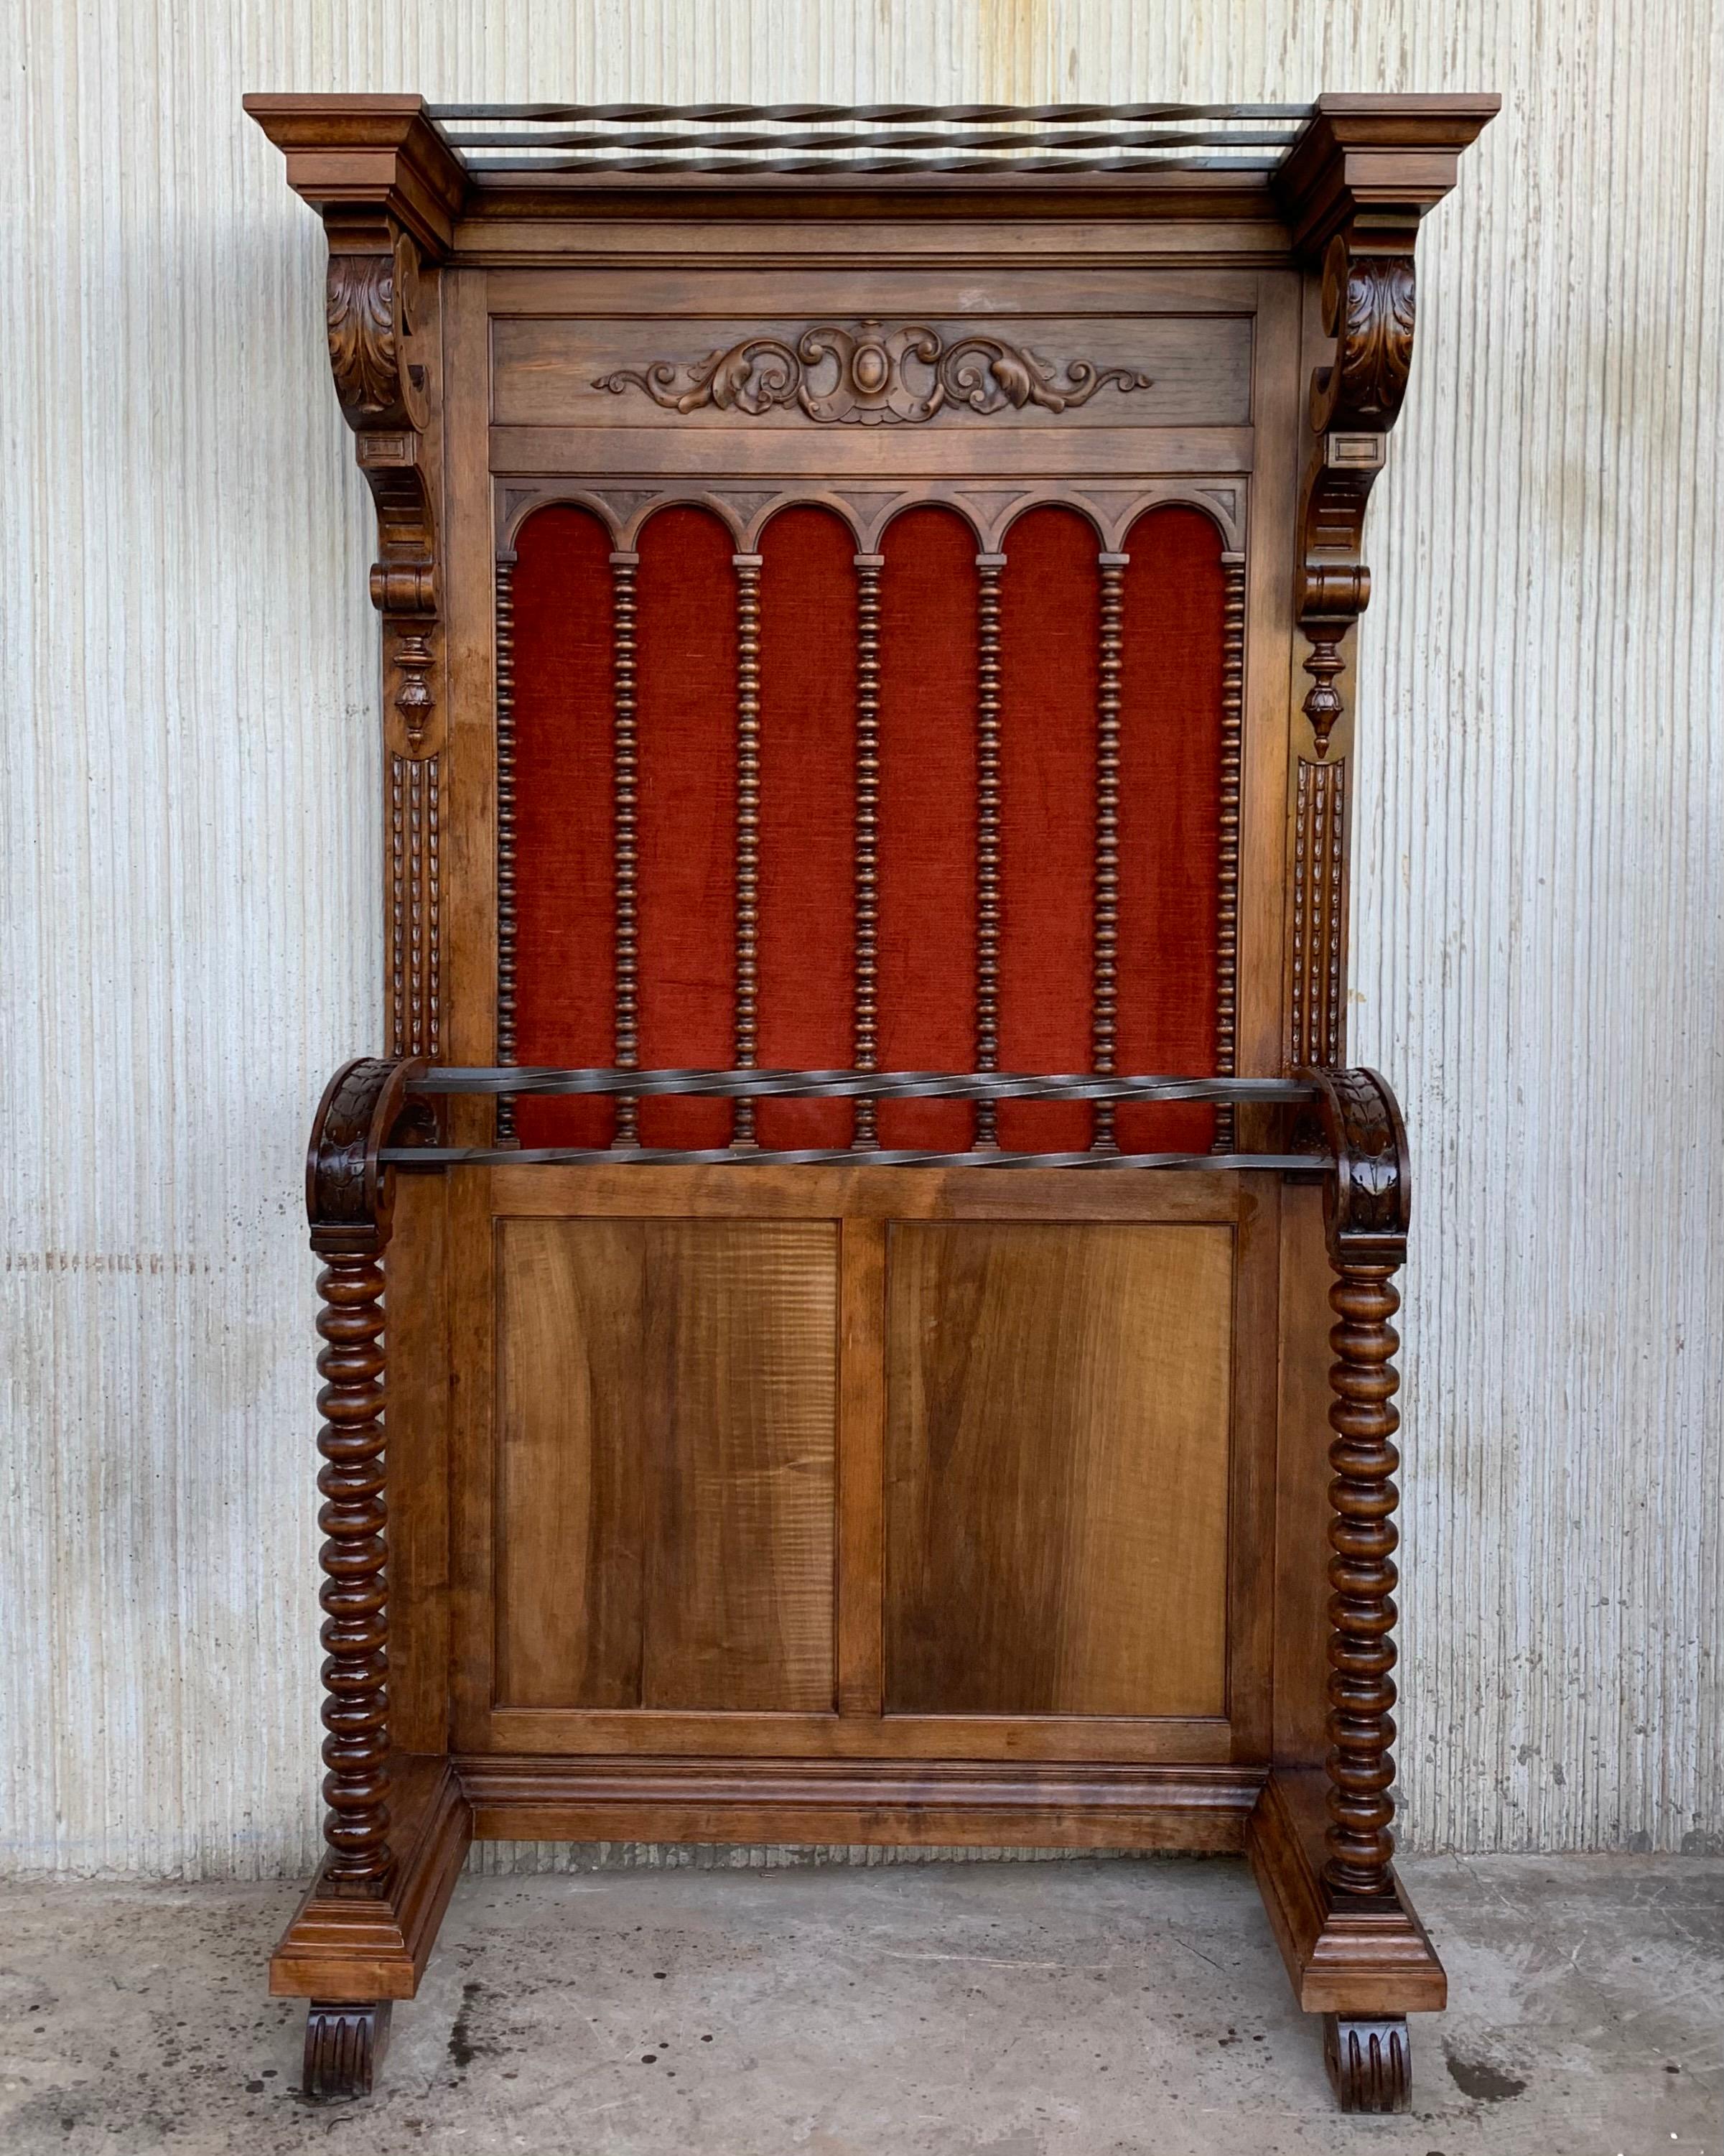 Large carved Spanish solid walnut hall stand has all of the original hardware which is heavy cast iron and has been polished and lacquered for easy maintenance. The top half is profusely carved with intricate urns, arabesques, and baskets of grapes